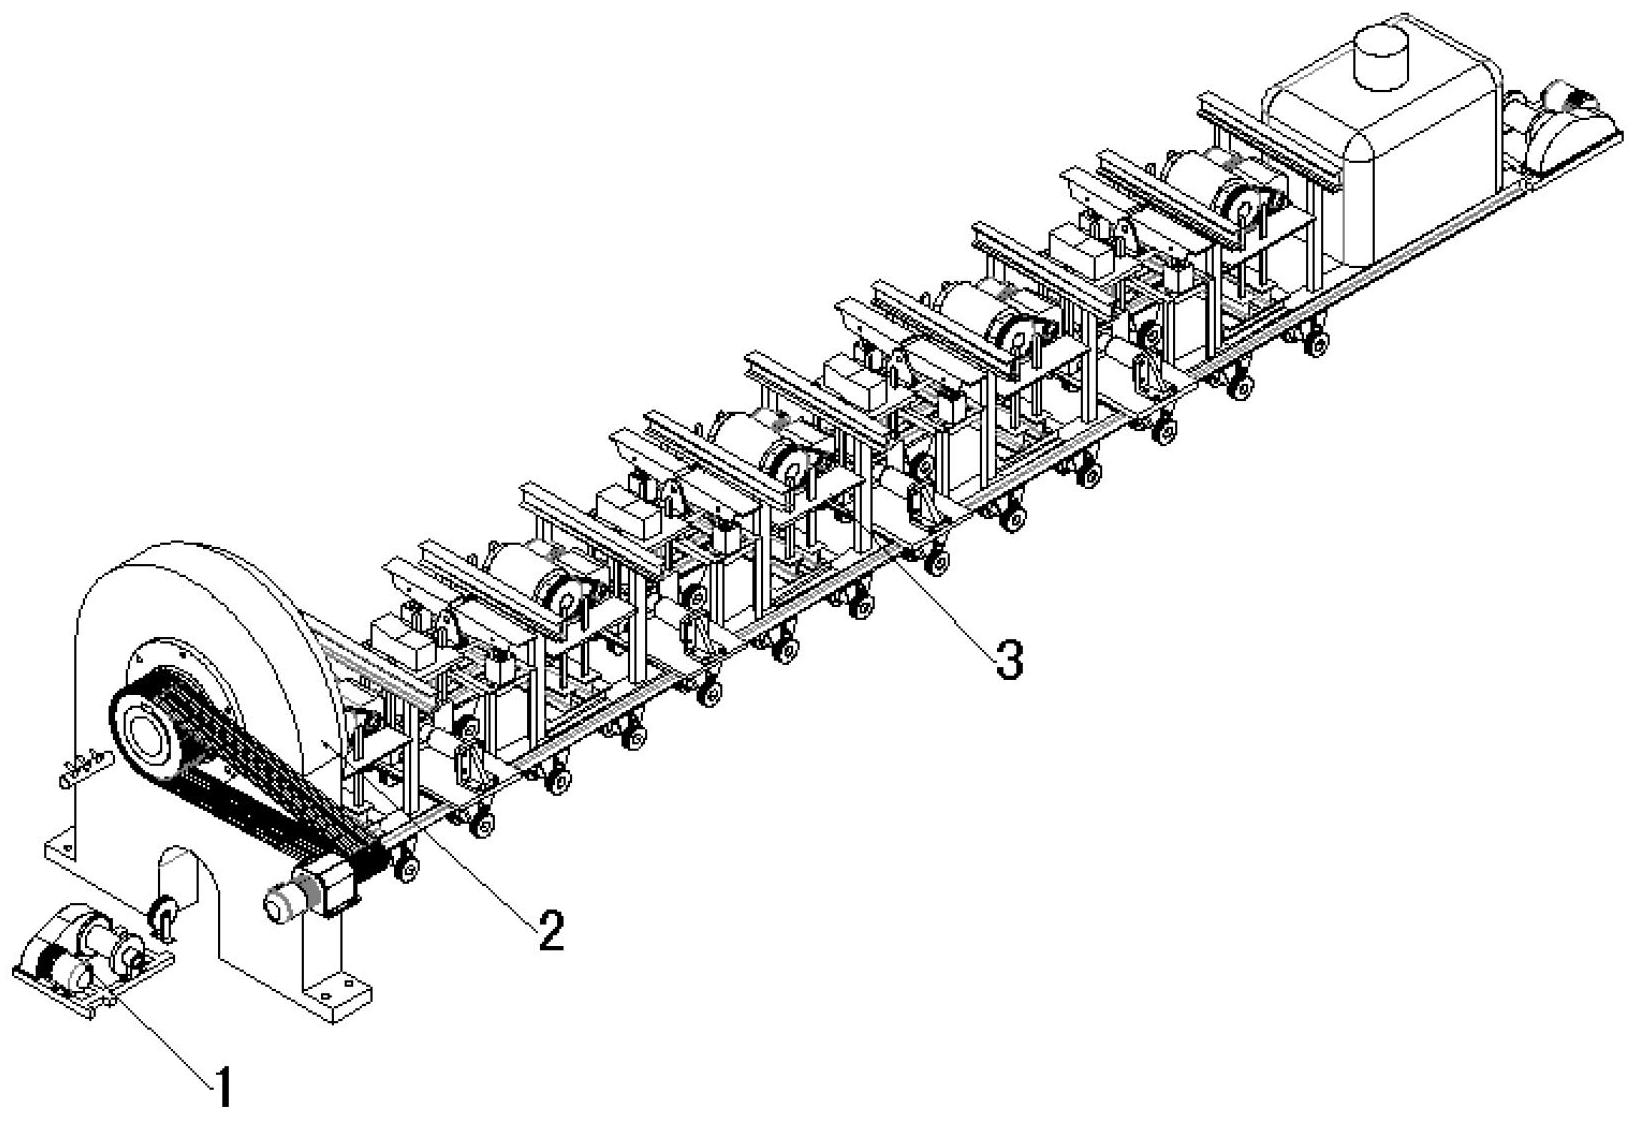 Bar overturning mechanism and conveying trolley for bar straightening machine